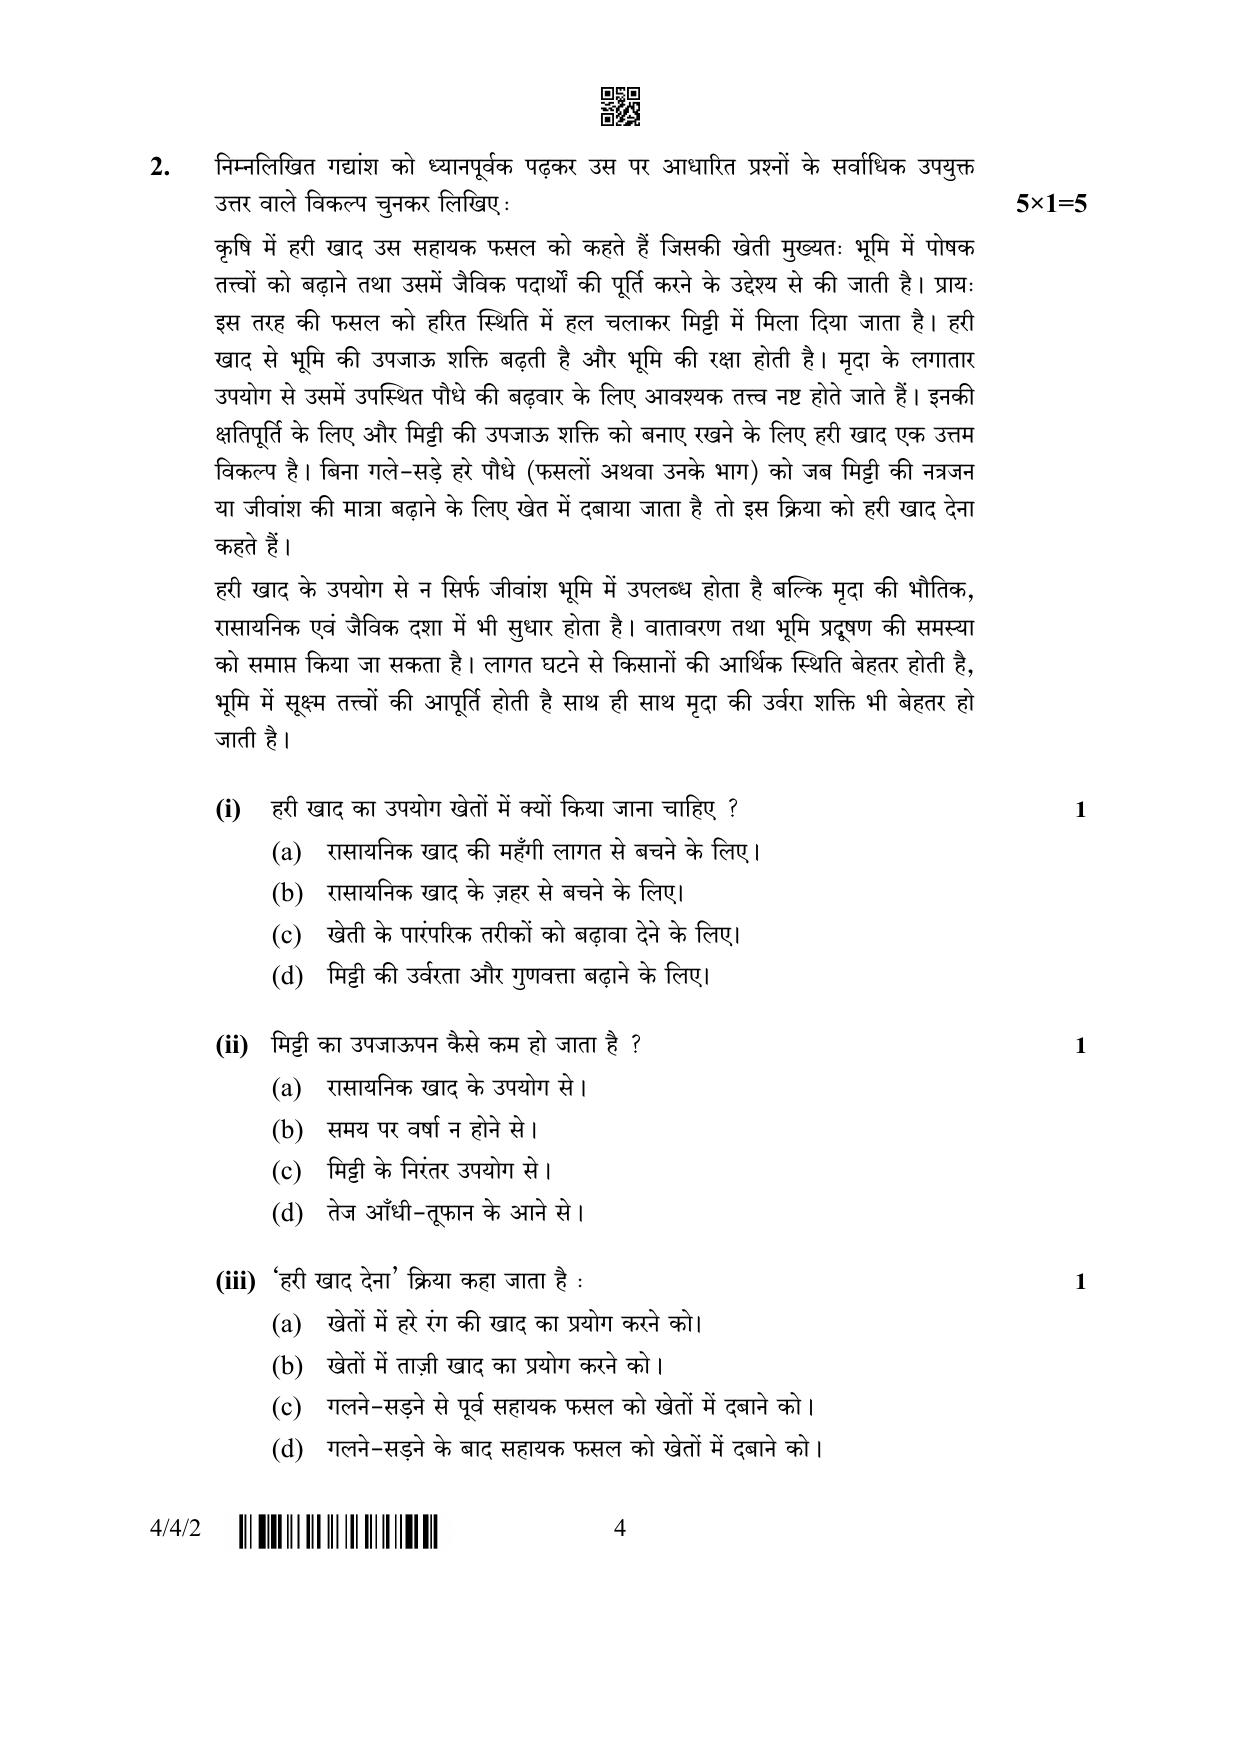 CBSE Class 10 4-4-2 Hindi B 2023 Question Paper - Page 4